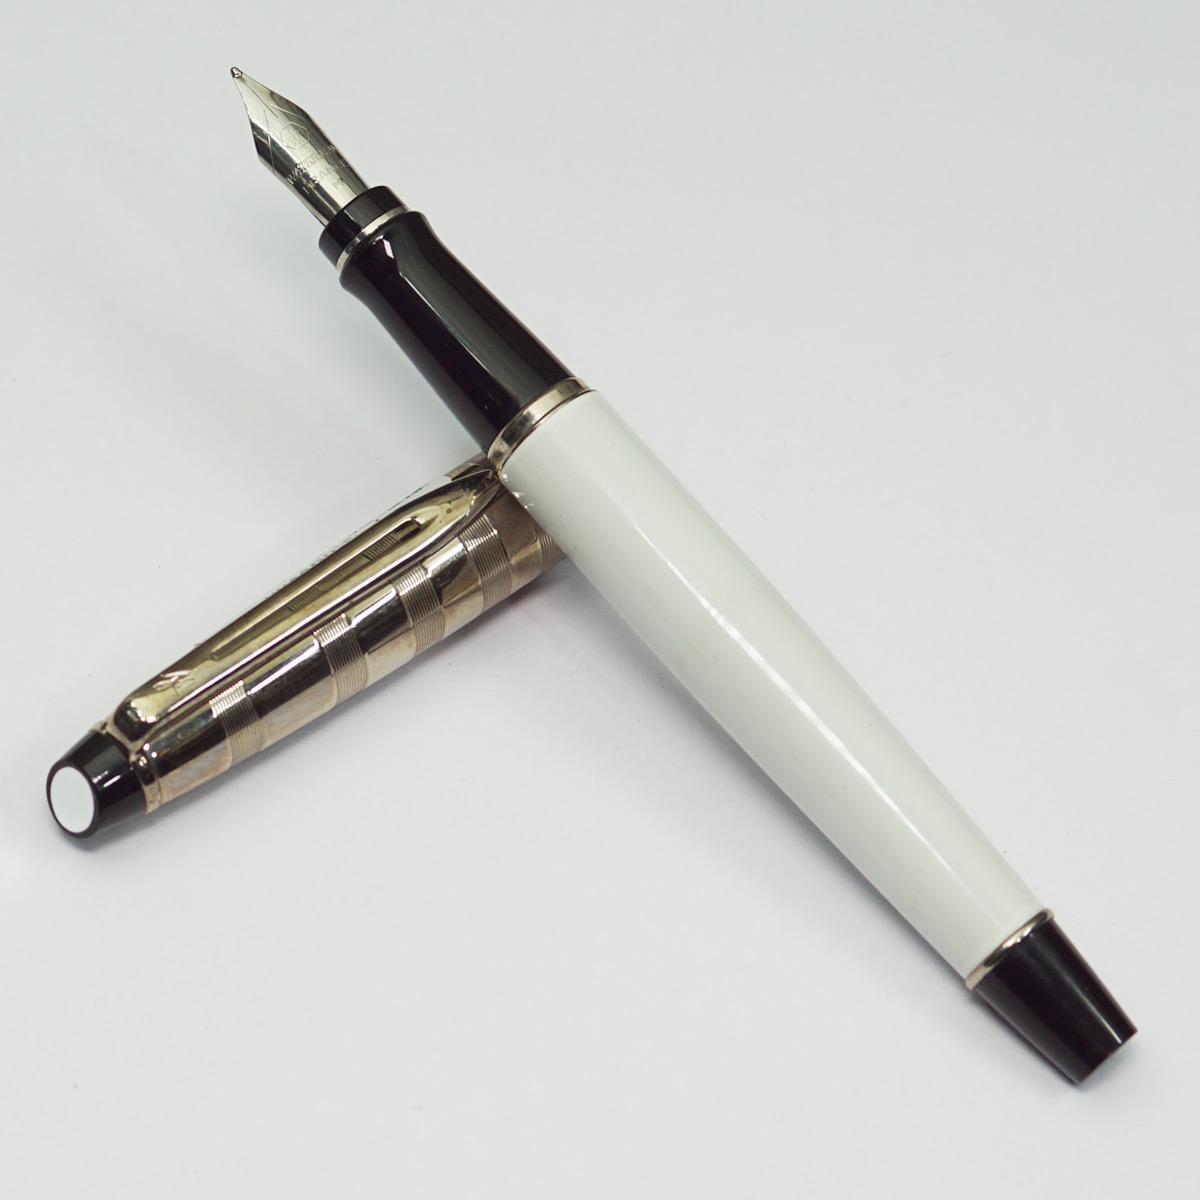 Waterman Expert White Color Body With Checked Silver Cap And Black Grip Medium Nib Converter Type Fountain Pen SKU 23043